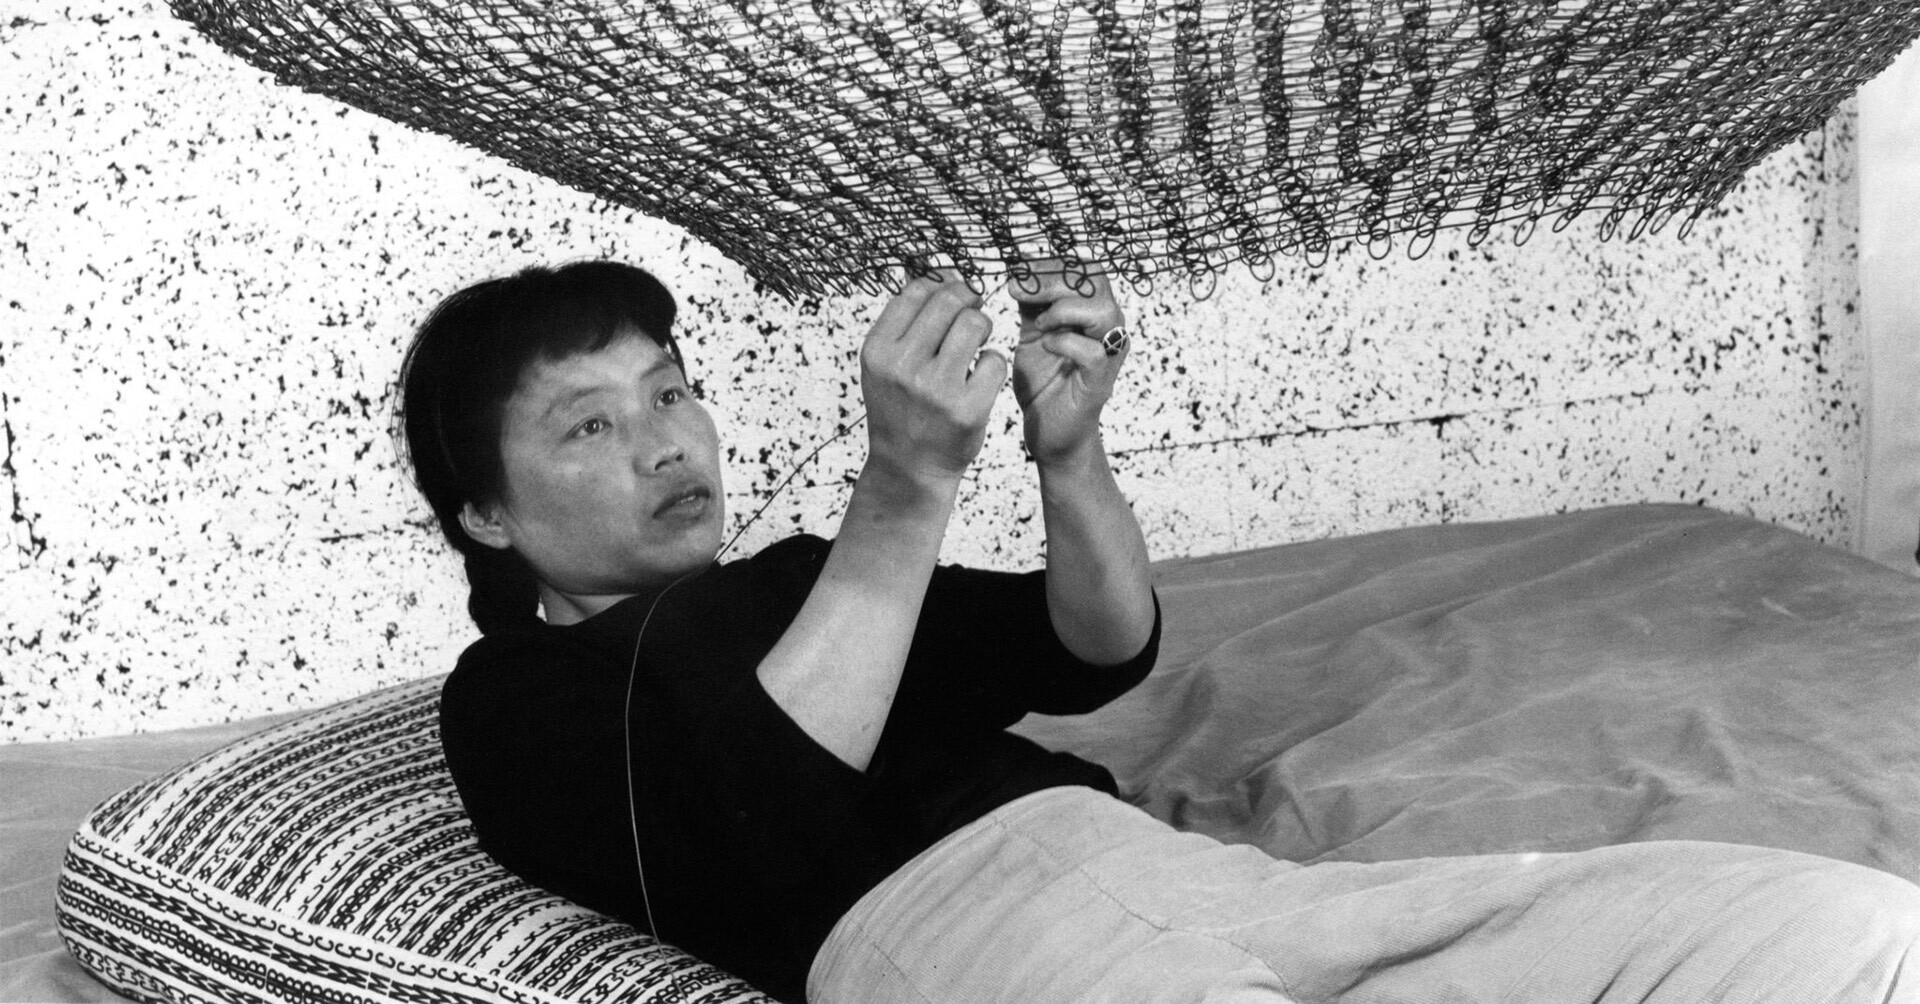 A photo of Ruth Asawa by Imogen Cunningham, dated 1957.